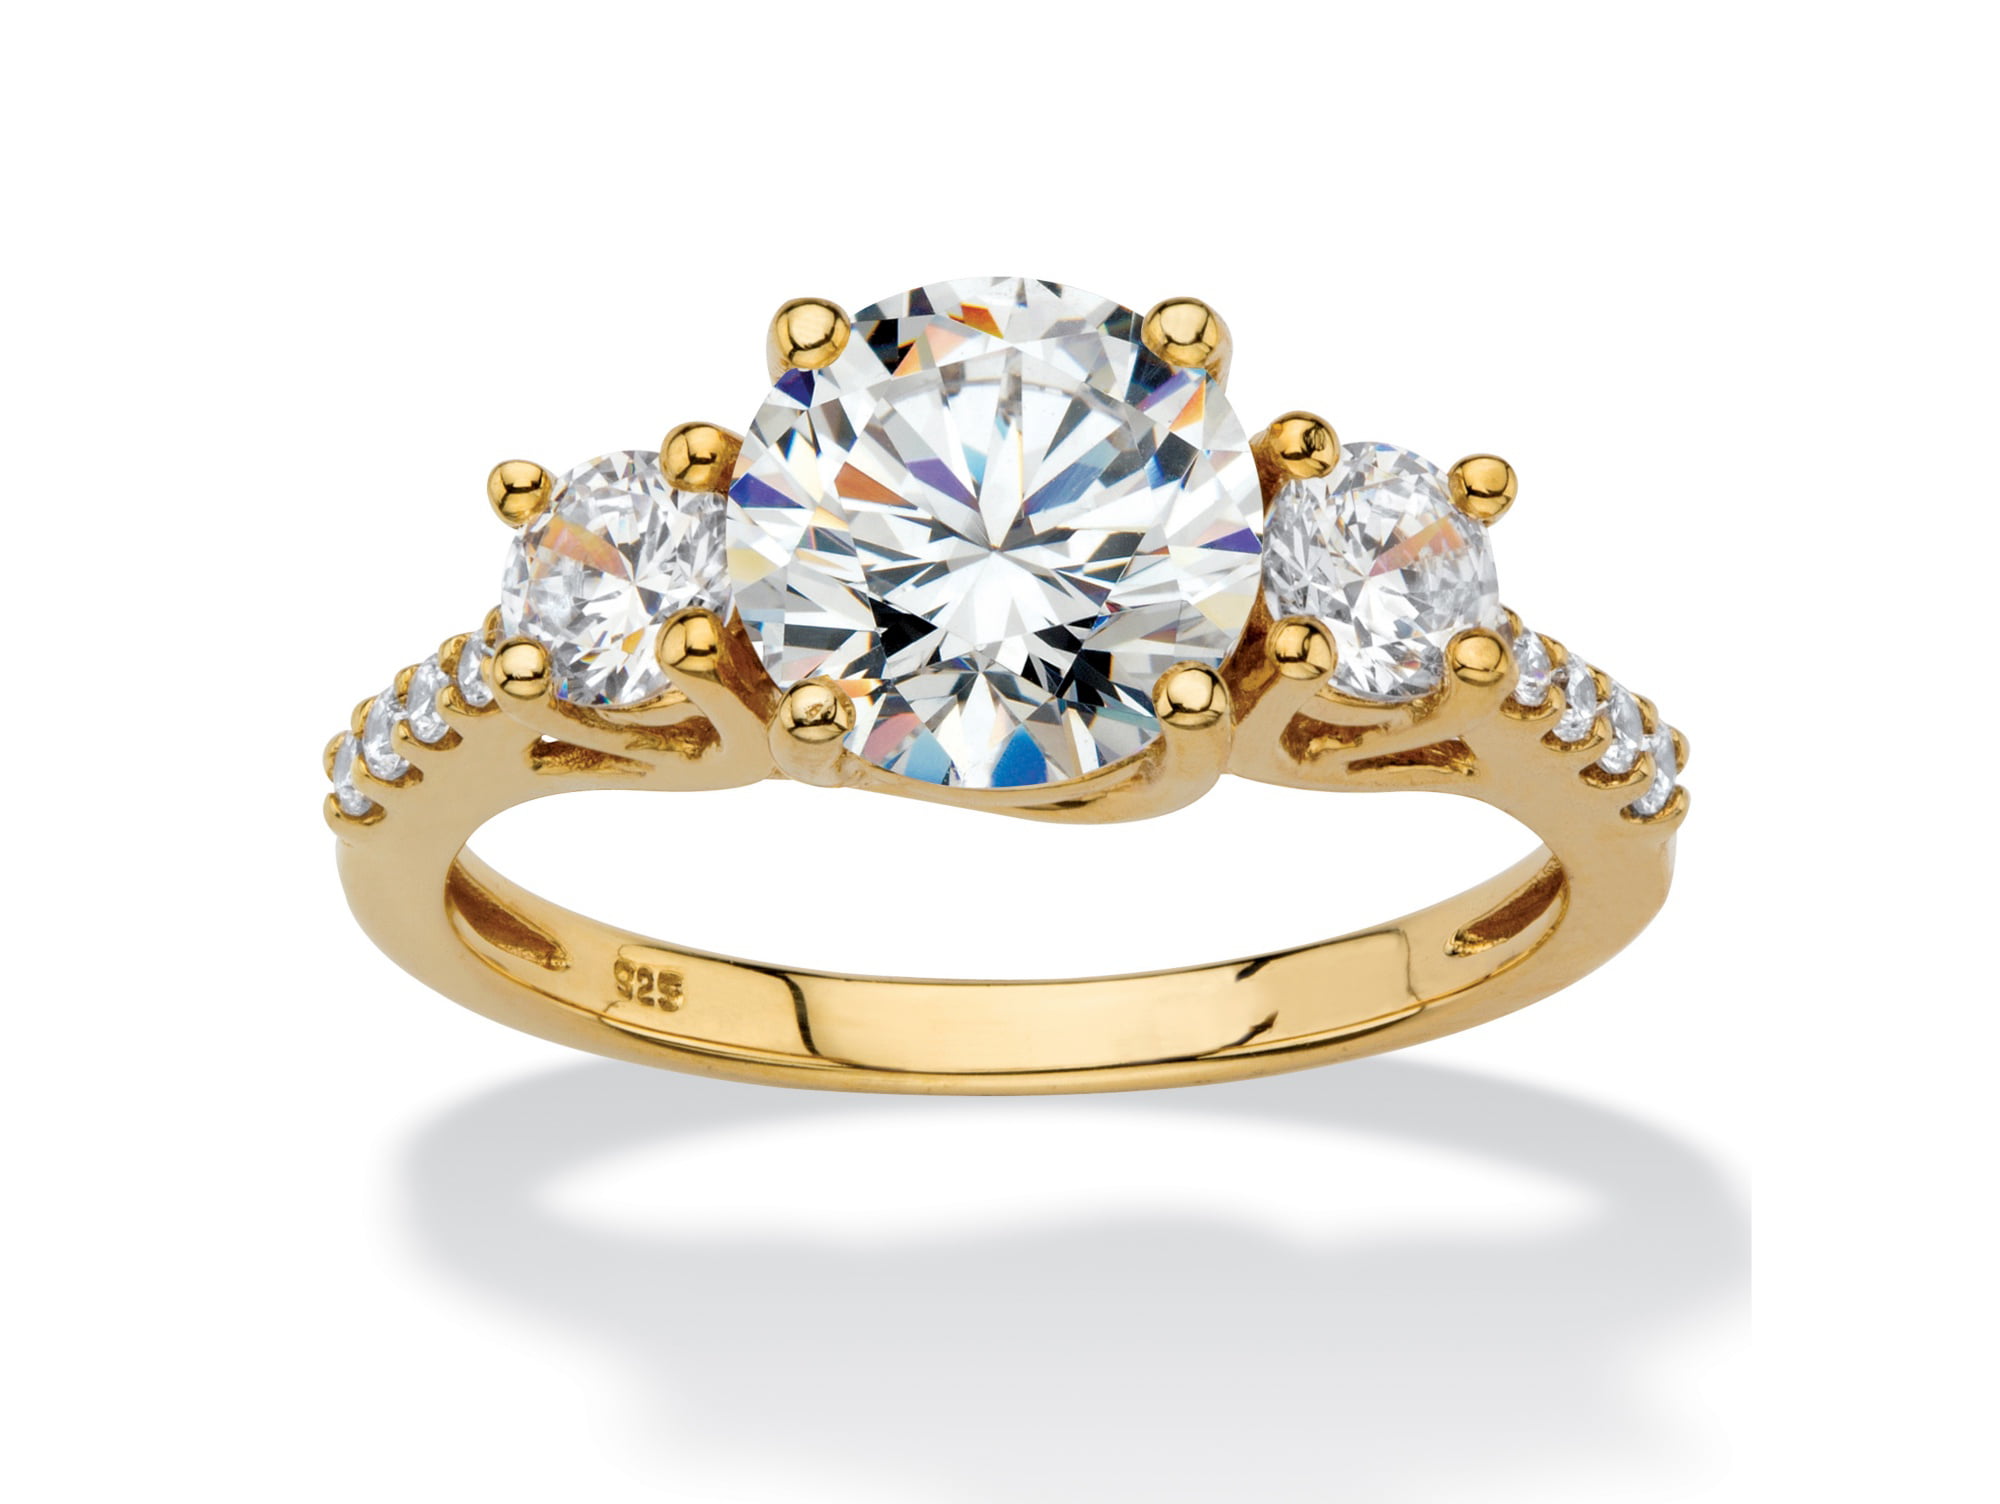 Details about   1.99 TCW Baguette-Cut 18k Gold over Silver Cubic Zirconia Engagement Ring 